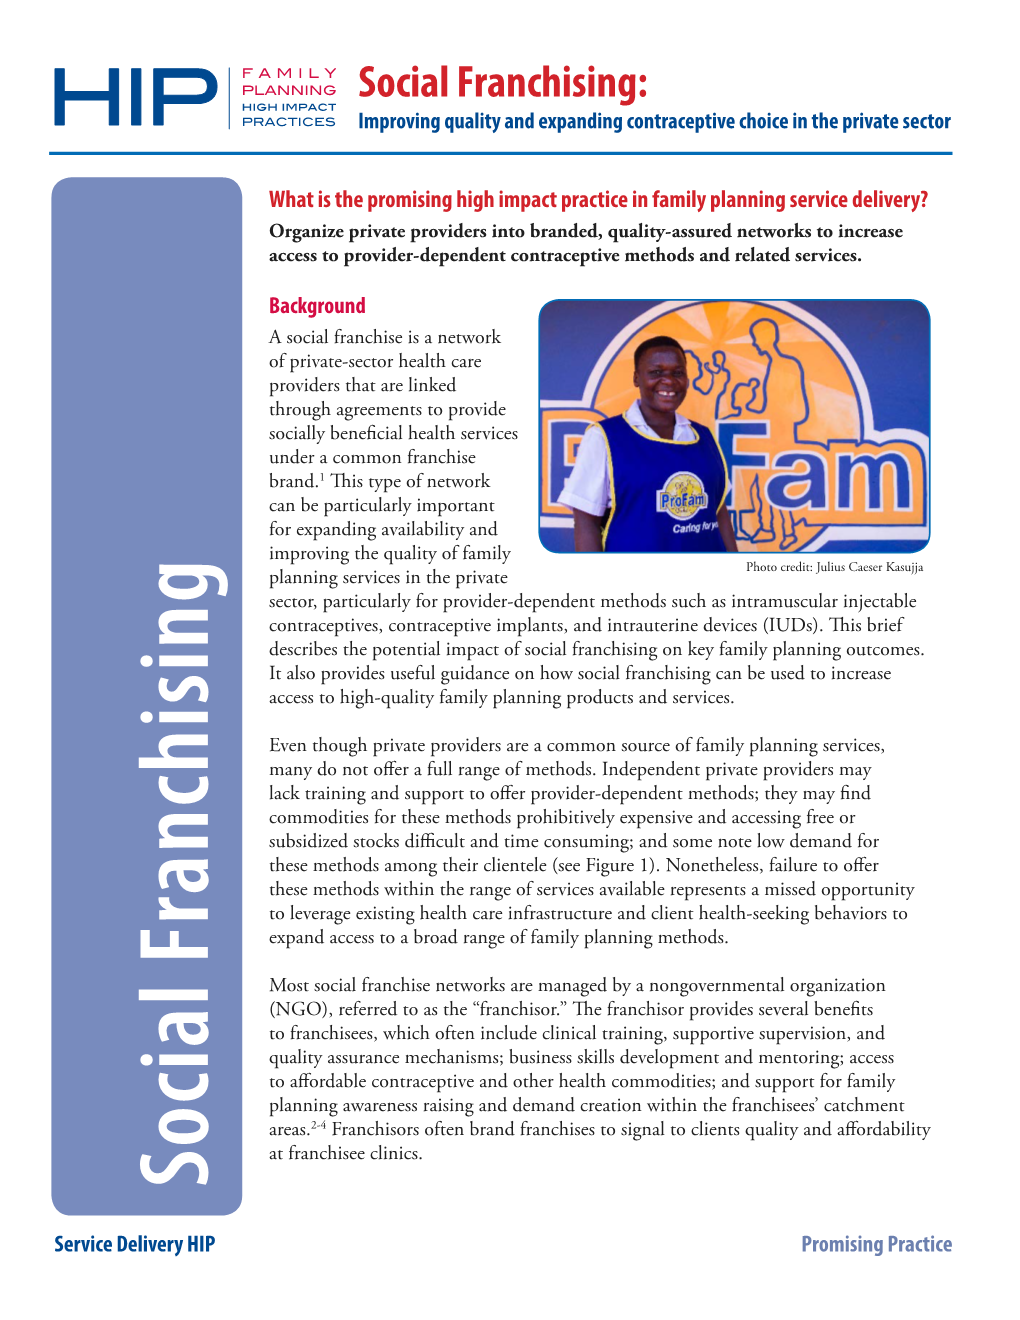 Social Franchising: Improving Quality and Expanding Contraceptive Choice in the Private Sector